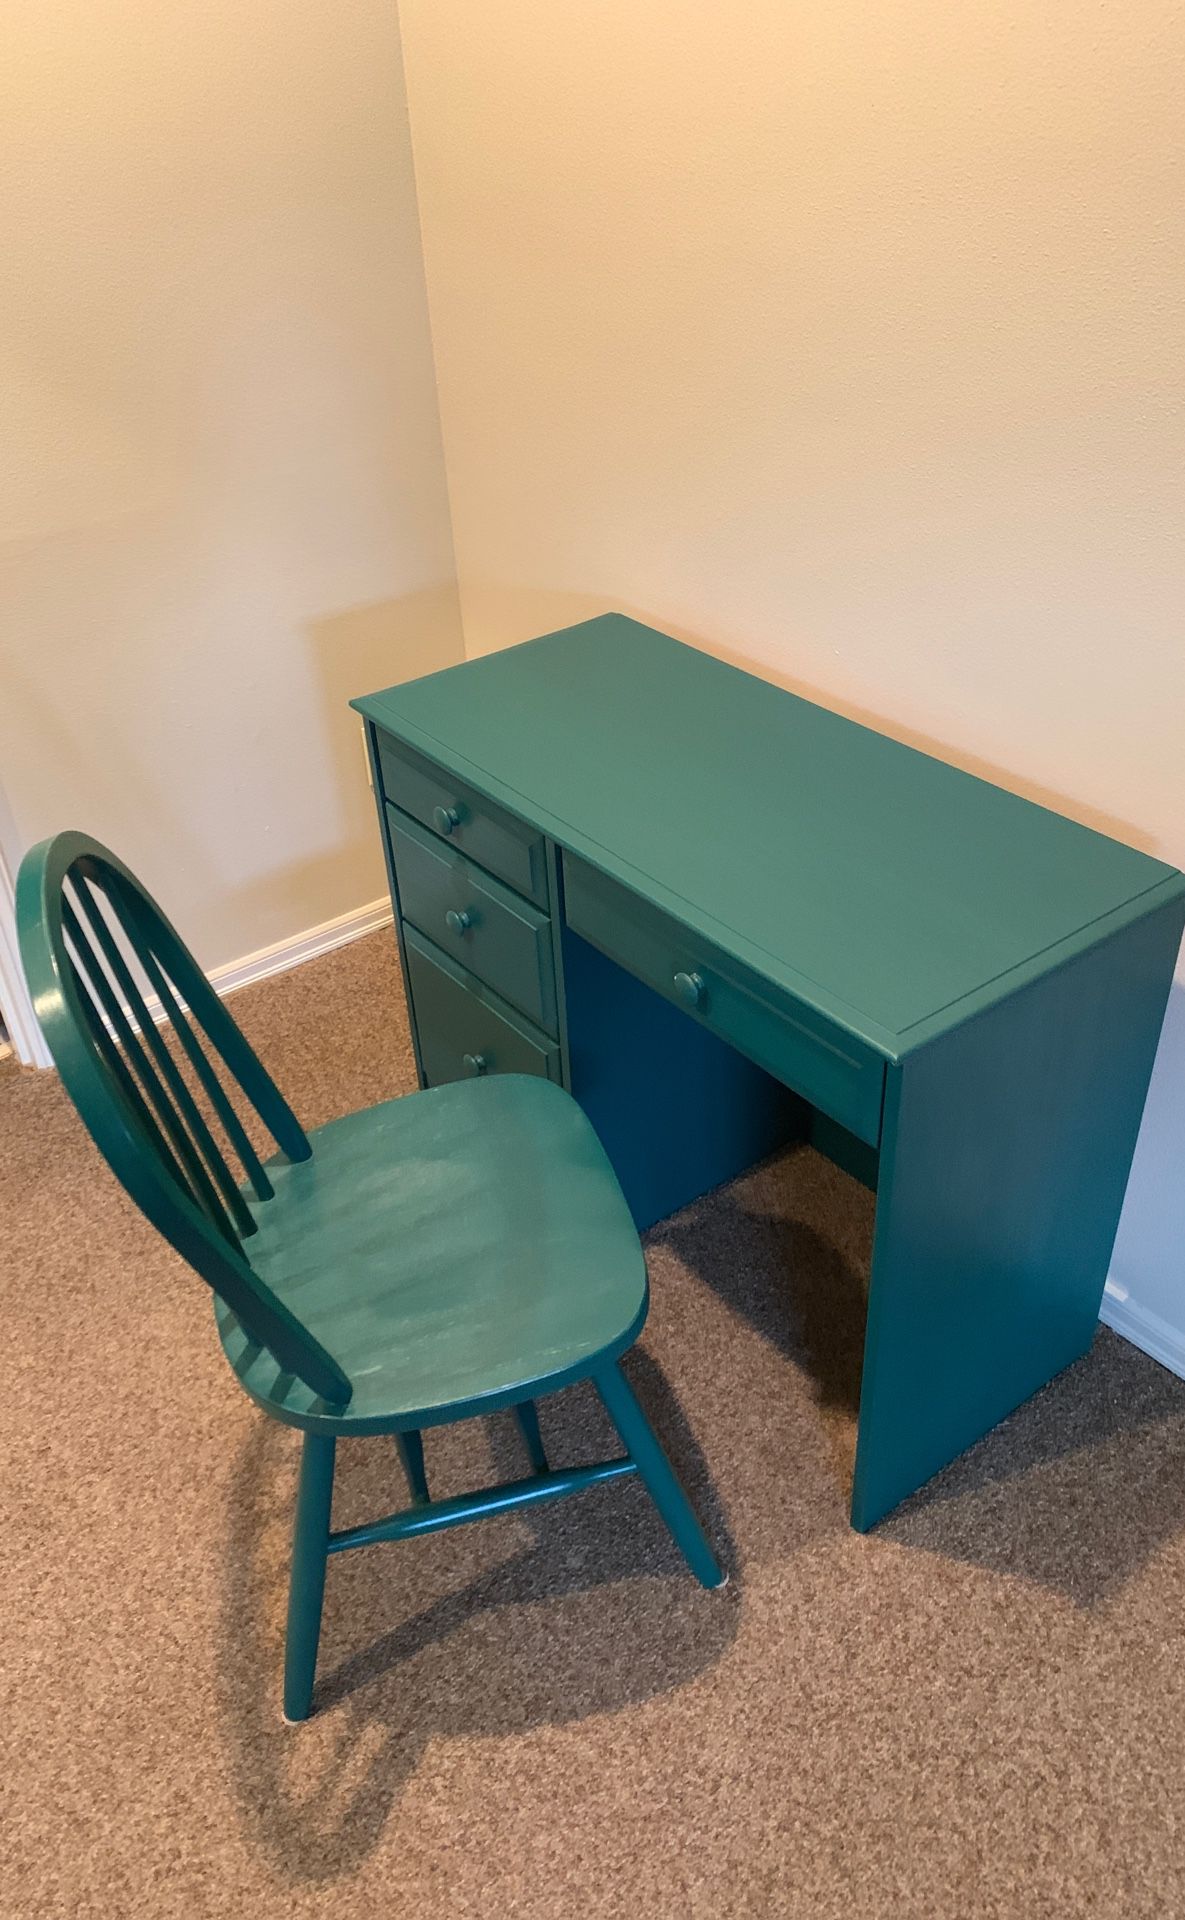 Small wood desk and matching chair